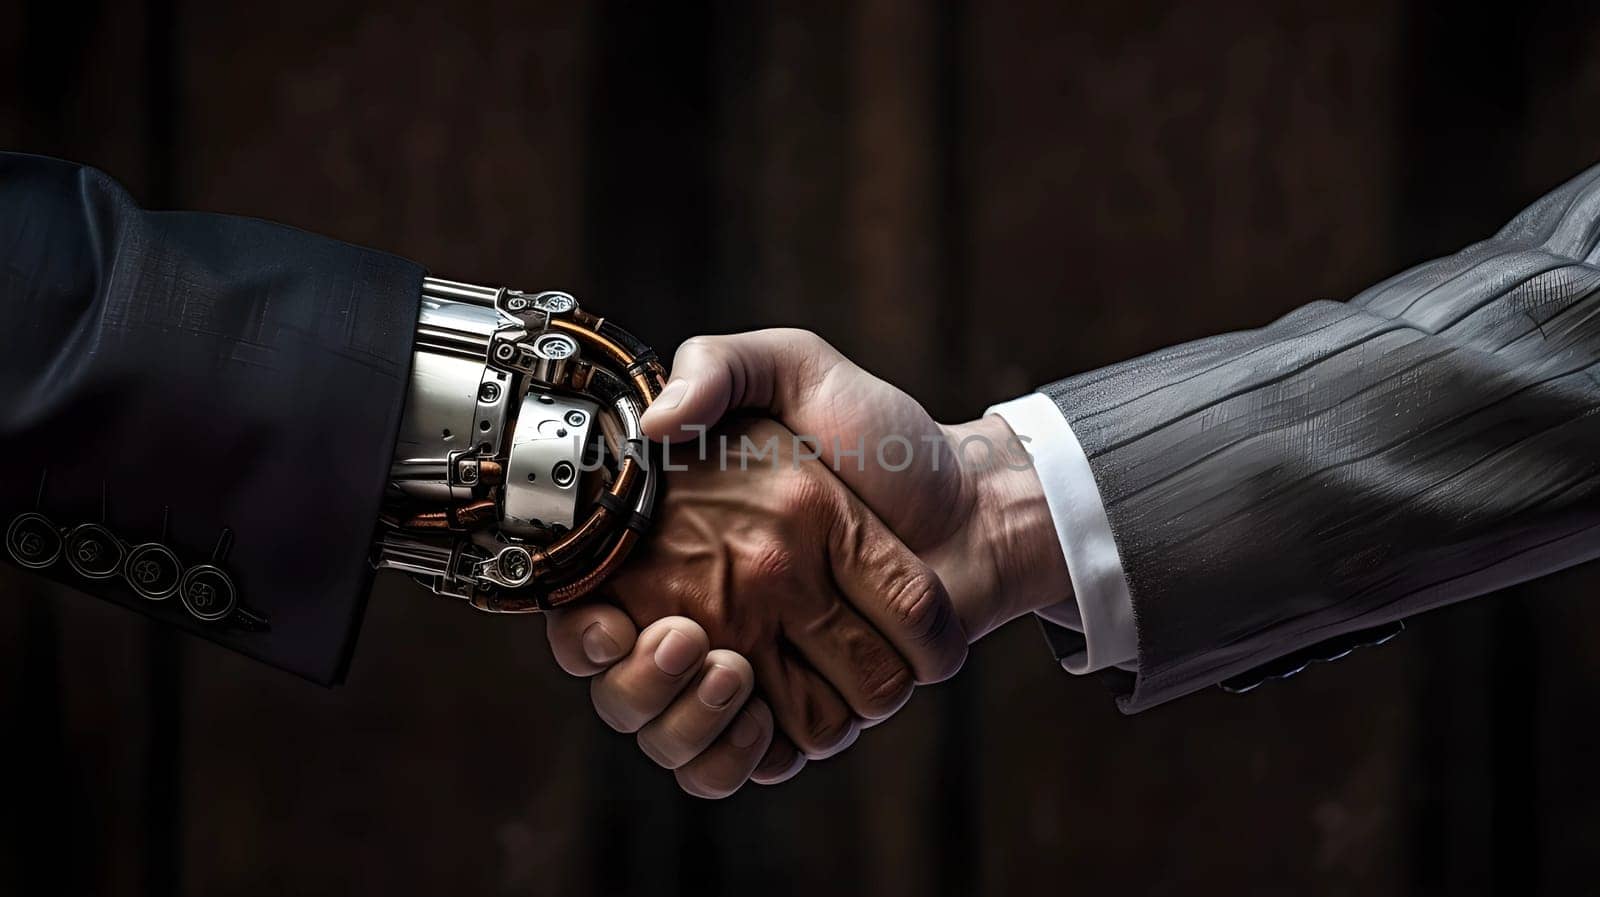 The hand of a man in a suit shakes the hand of a robot on a dark background